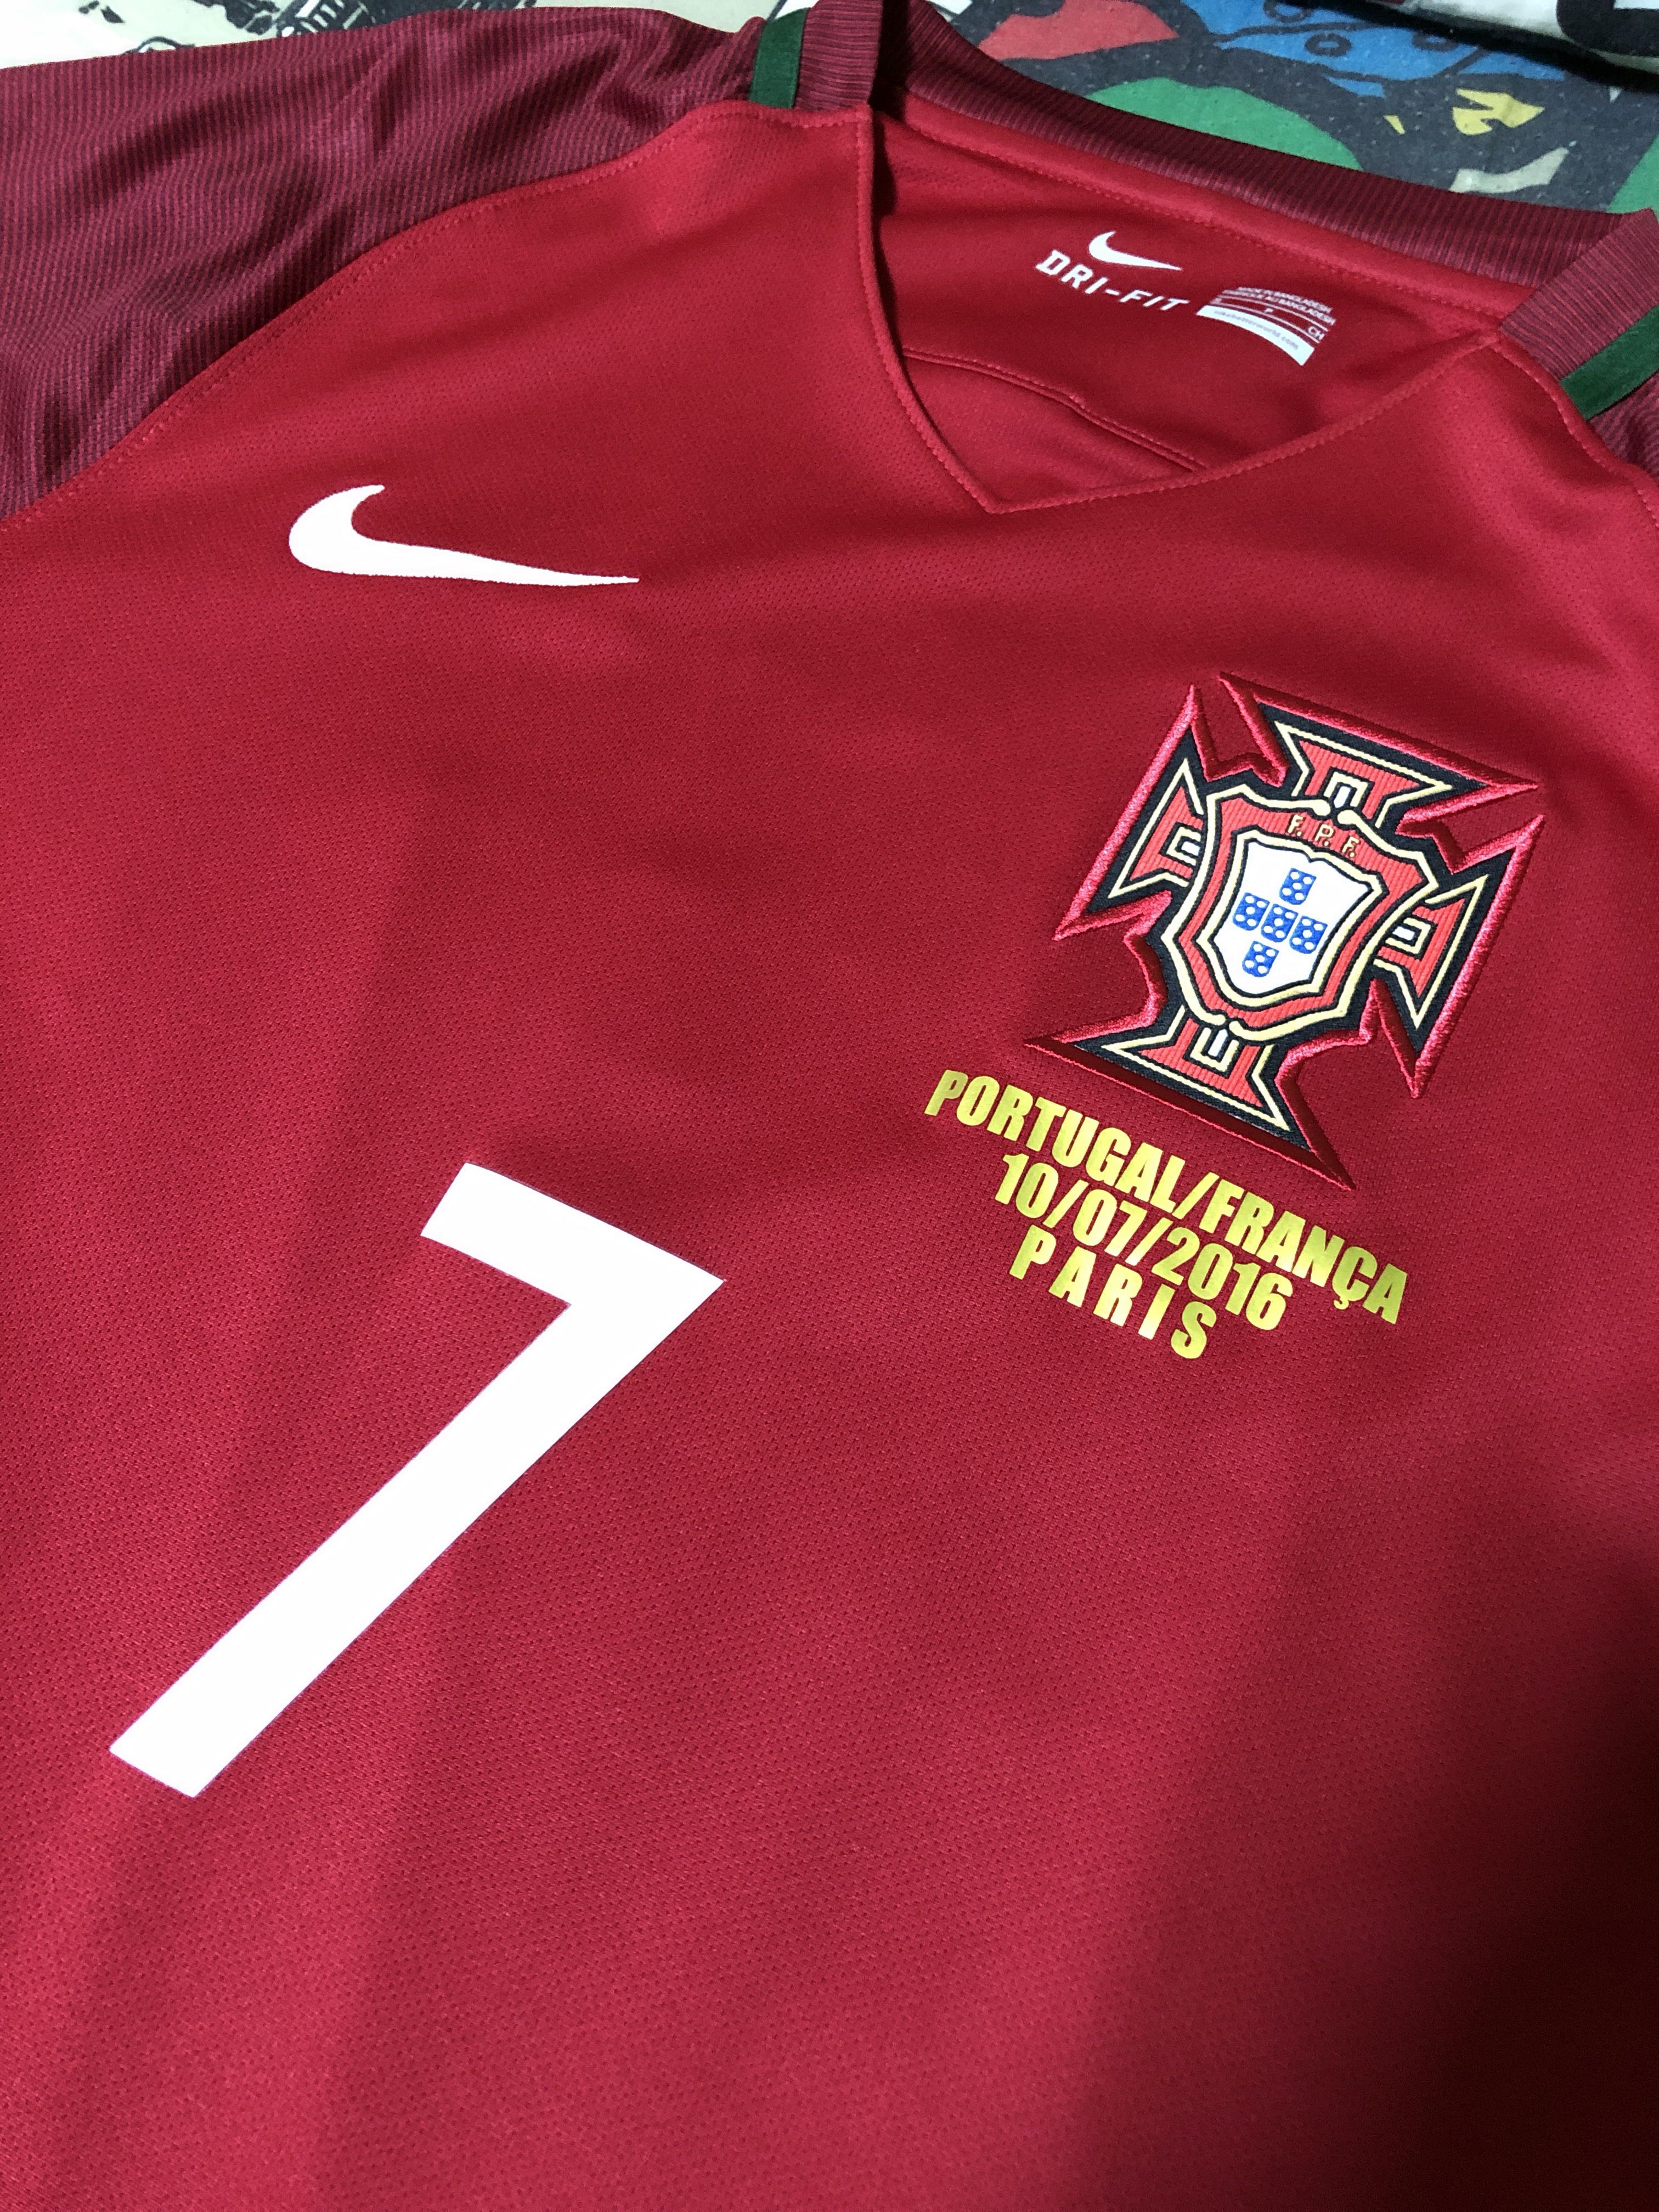 euro portugal jersey